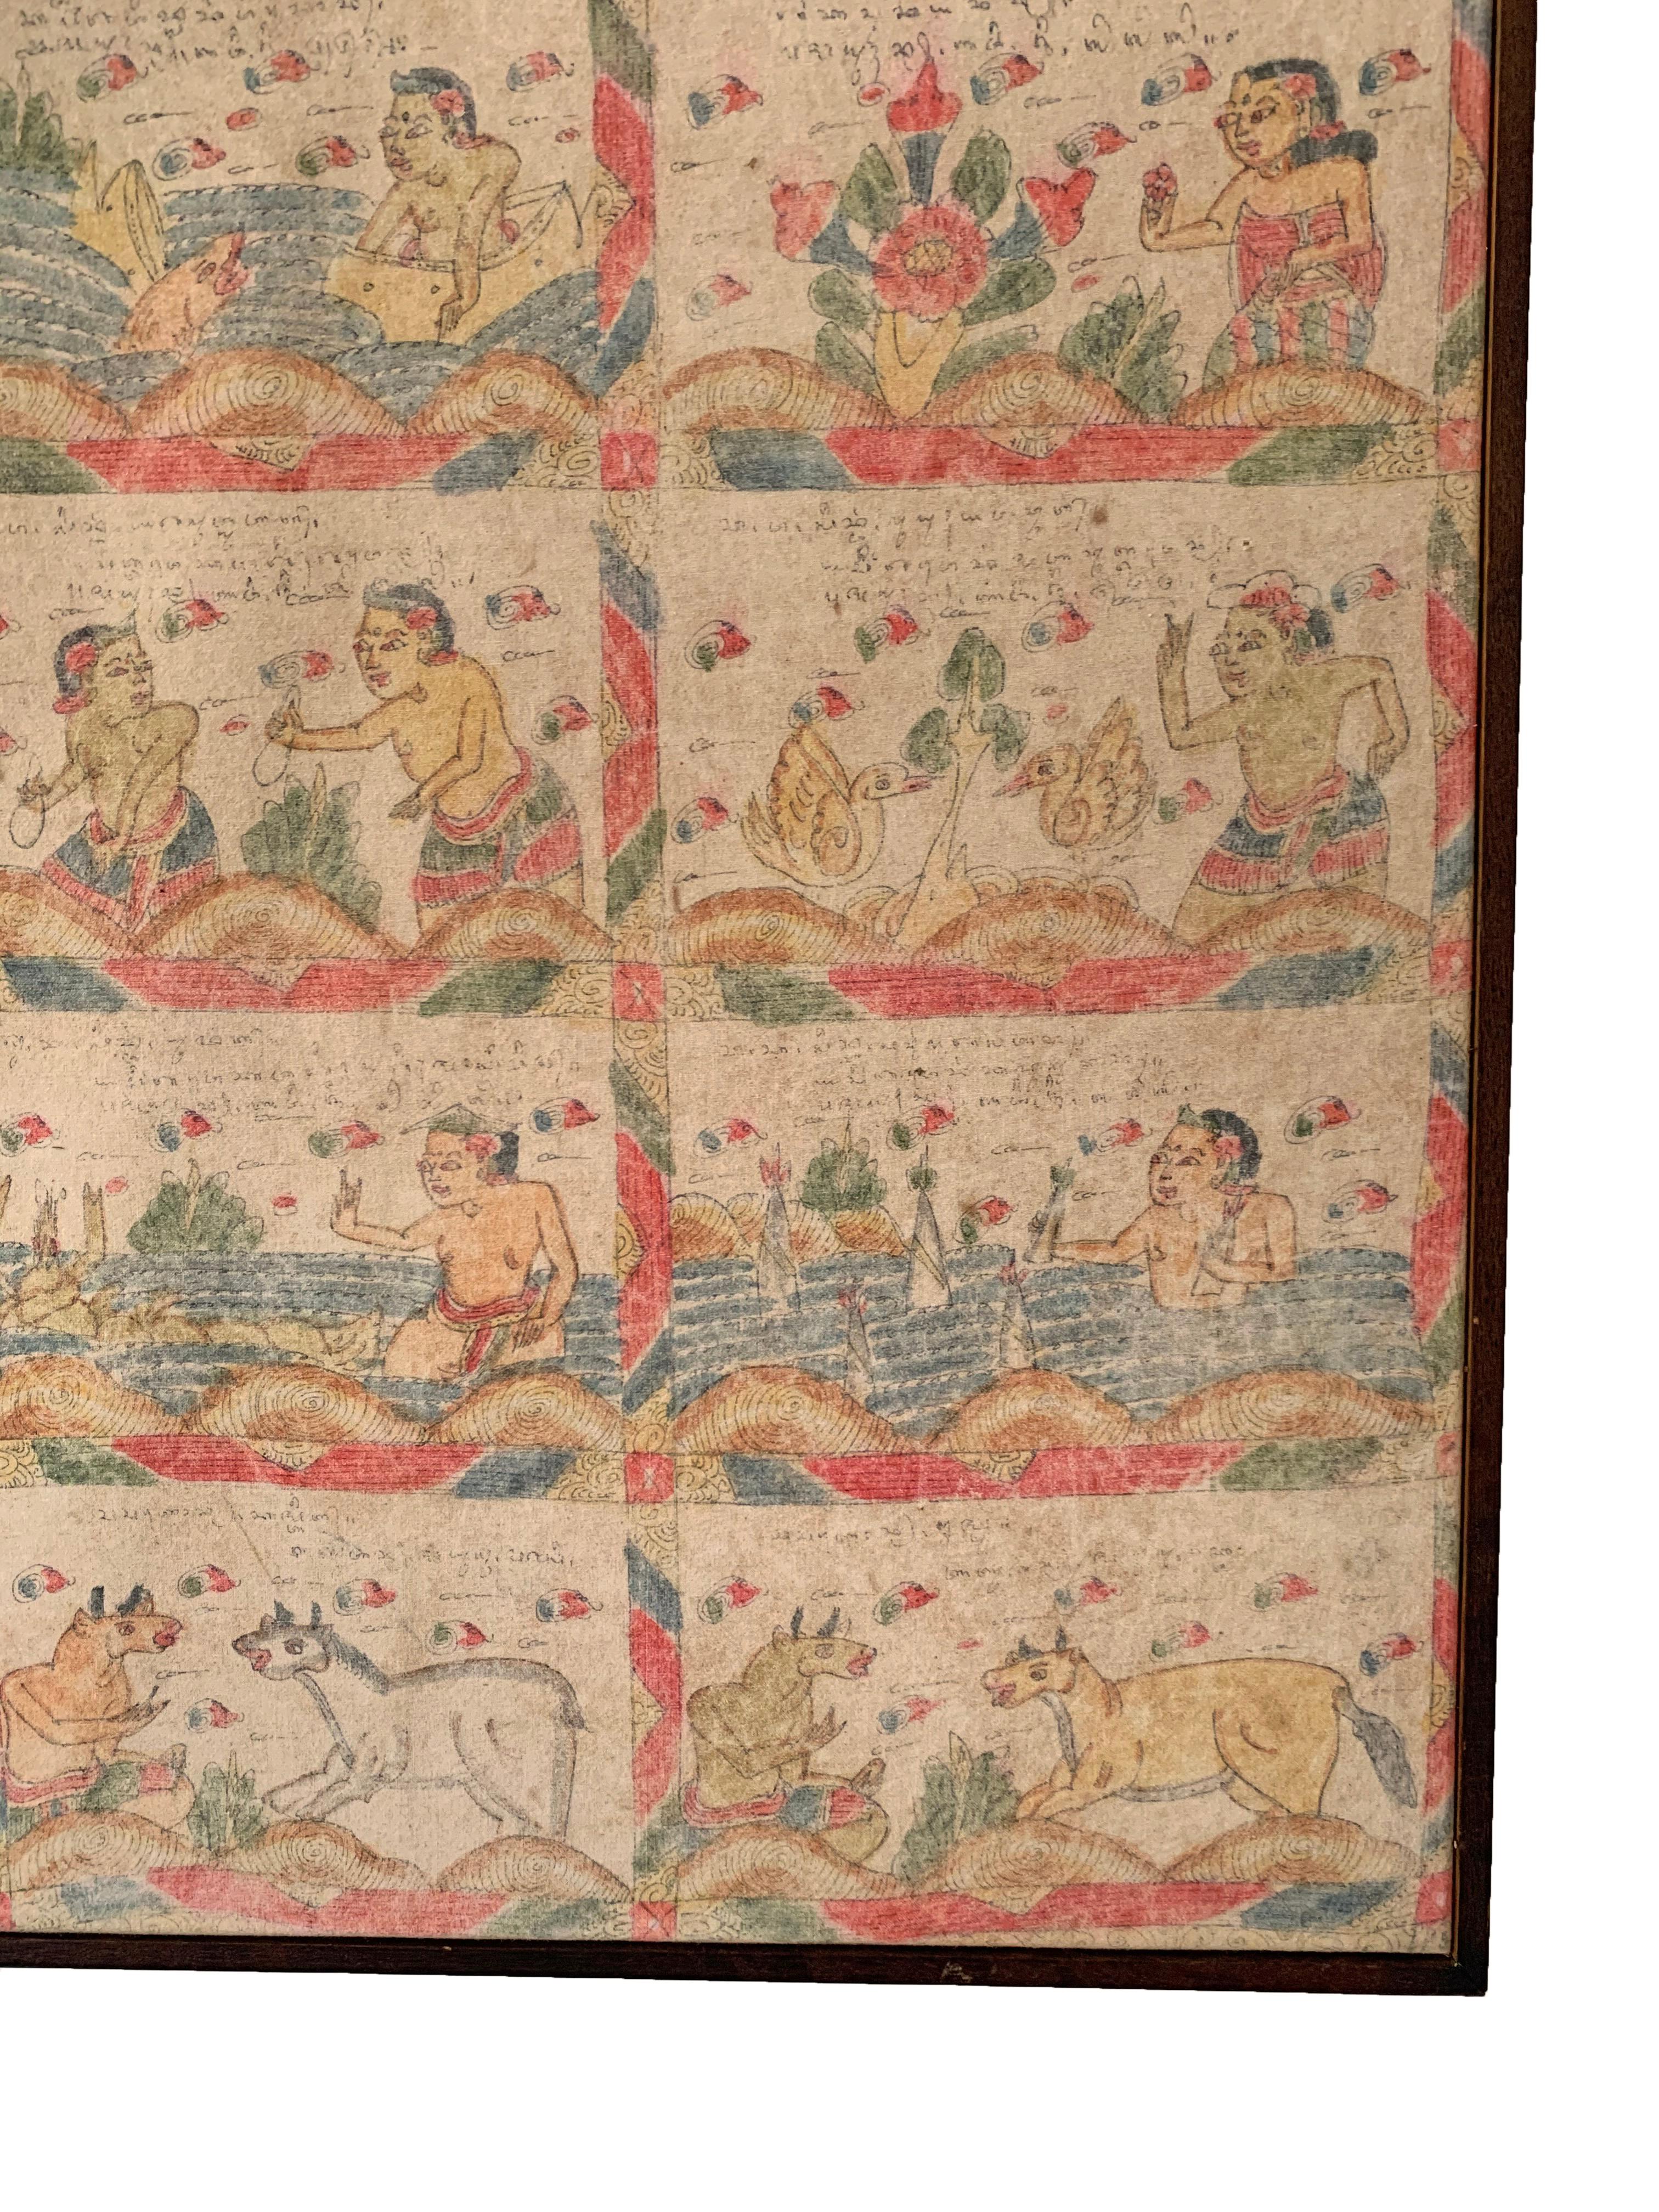 Hand-Painted Bali Hindu Textile Framed 'Kamasan' Painting, Indonesia, Early 20th Century